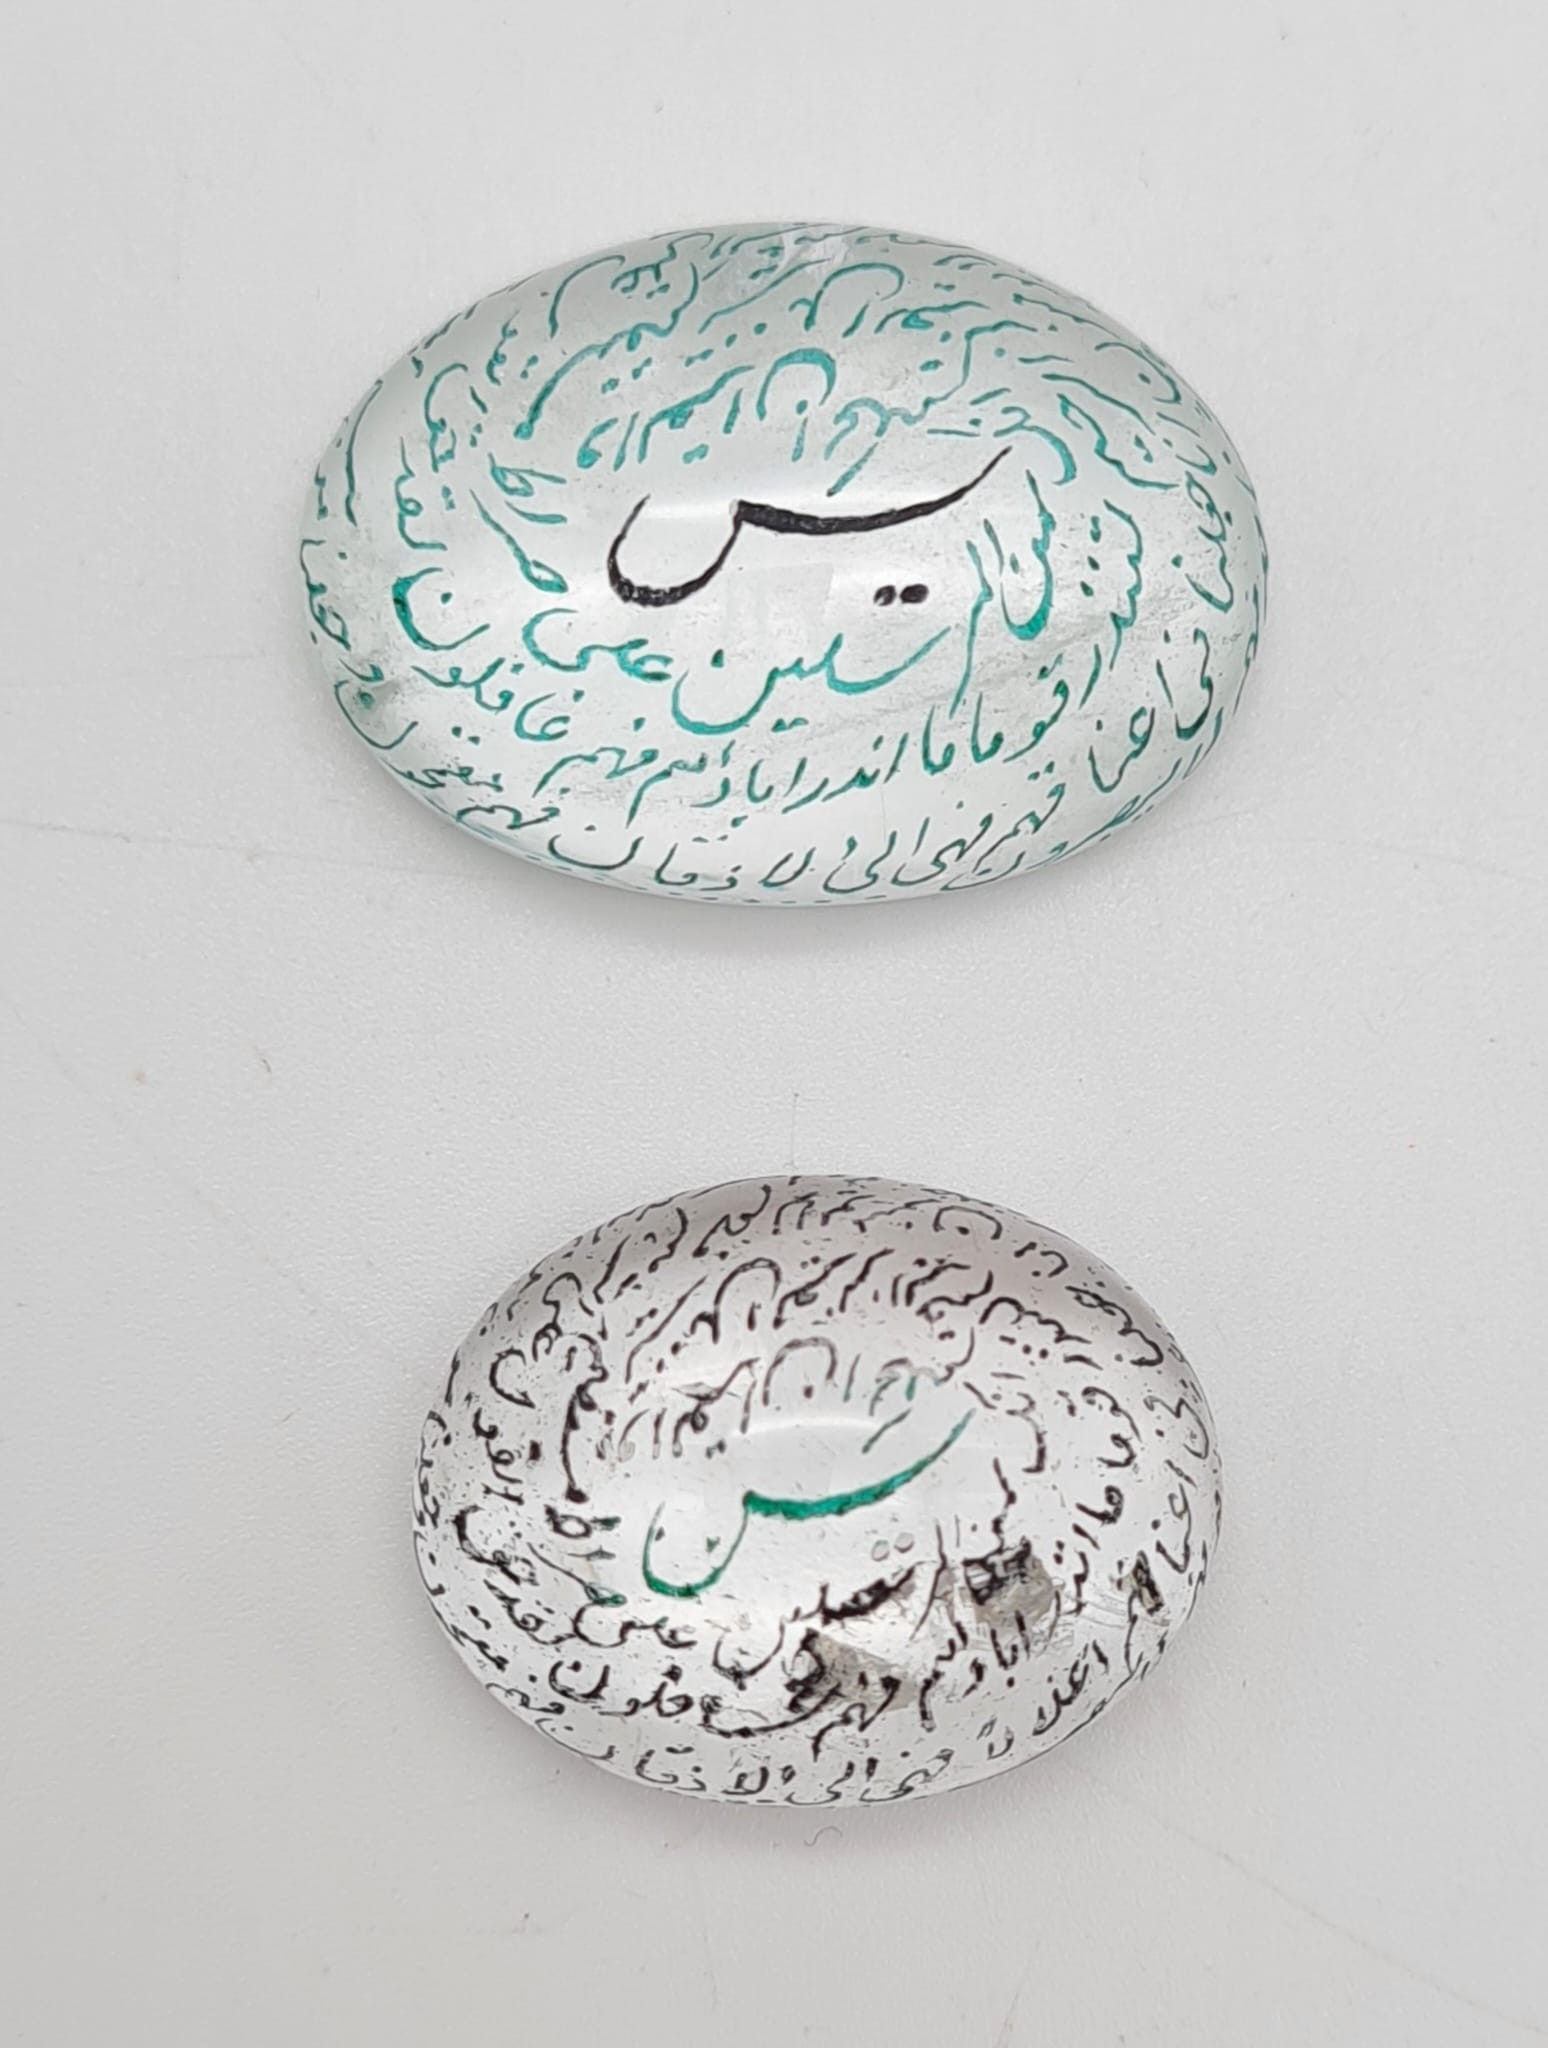 Eight Islamic Persian Prayer Crystal Beads - With Arabic Calligraphy. Average size 3.5 x 2.5cm. 100g - Image 2 of 5